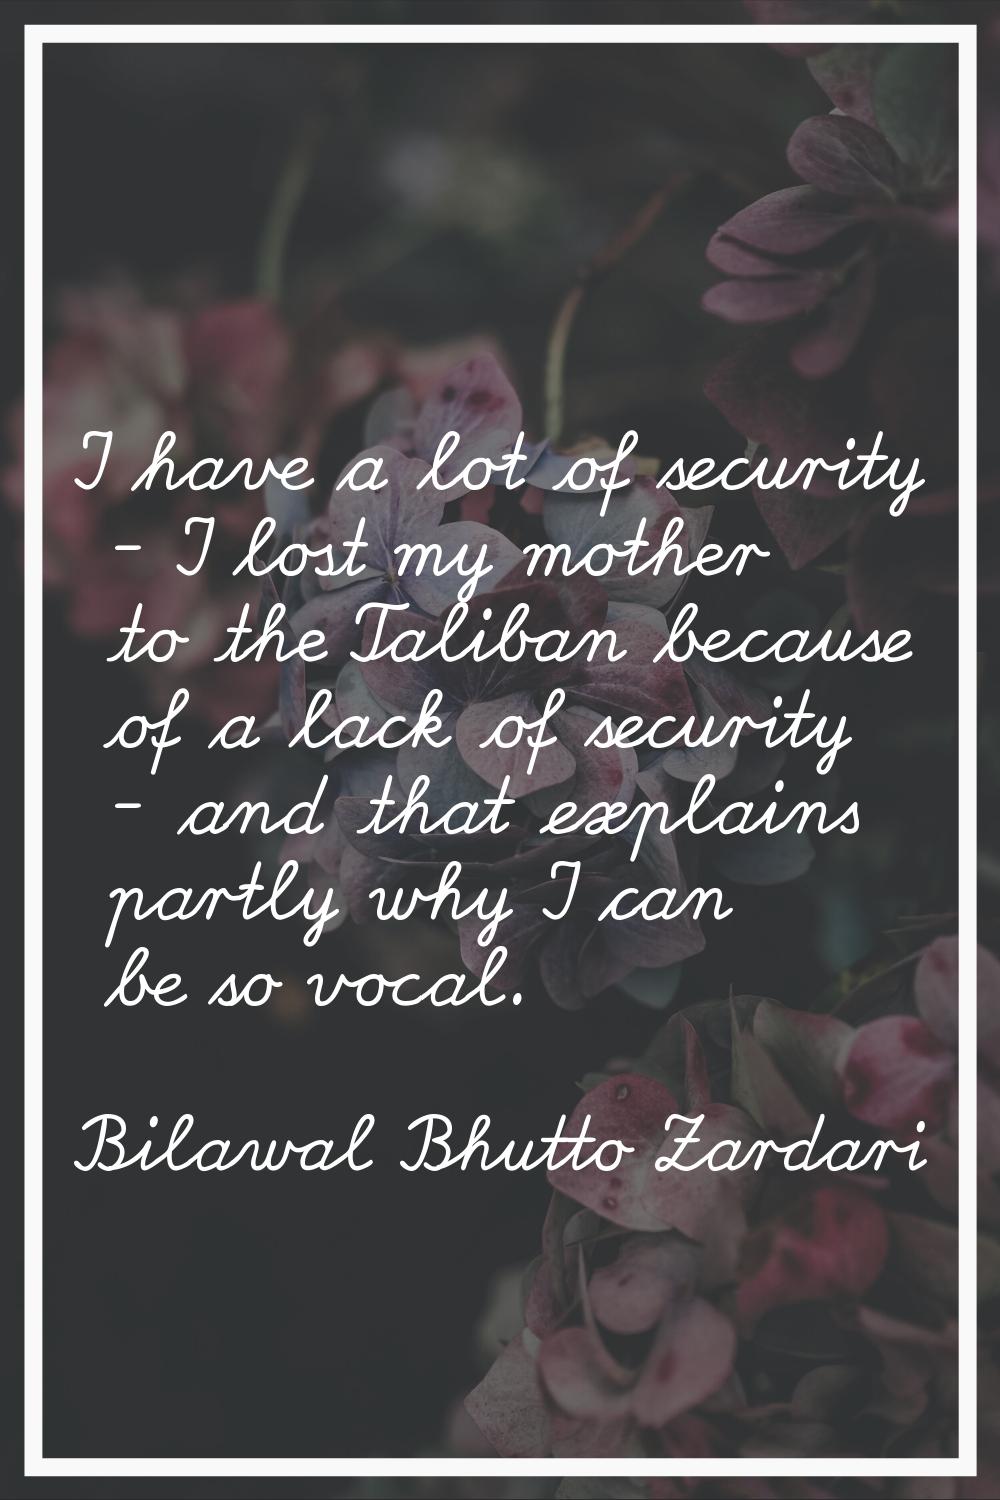 I have a lot of security - I lost my mother to the Taliban because of a lack of security - and that